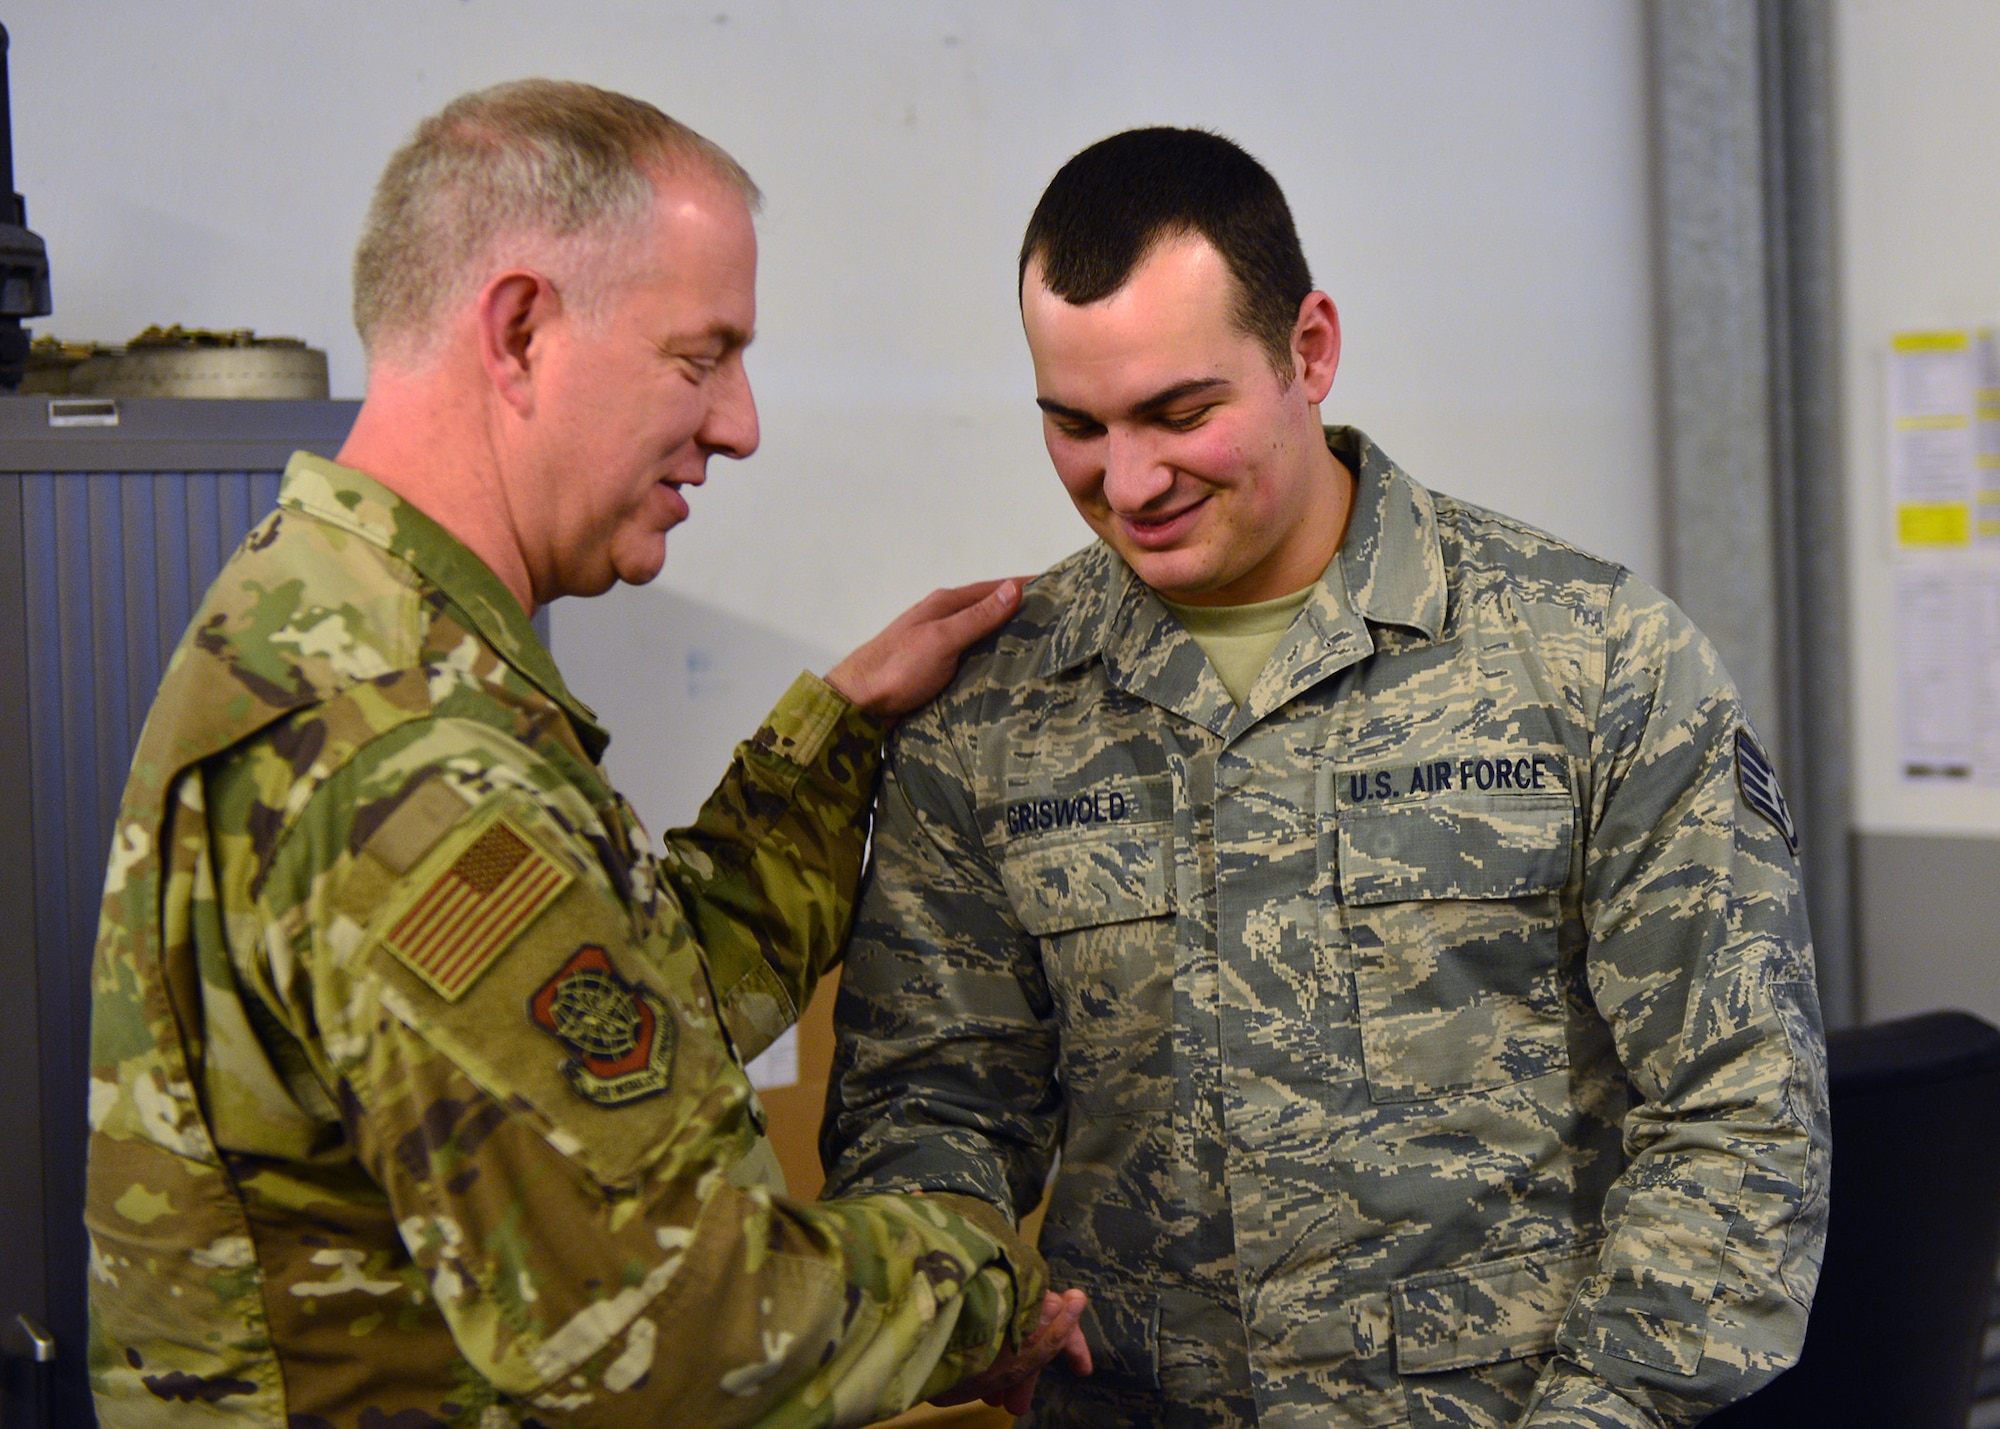 U.S. Air Force Maj. Gen. John Gordy, U.S. Air Force Expeditionary Center commander, hands a coin to Staff Sgt. Cody Griswold, 721 Aircraft Maintenance Squadron vehicle noncommissioned officer, for outstanding performance in his unit at Ramstein Air Base, Germany, March 14, 2019.